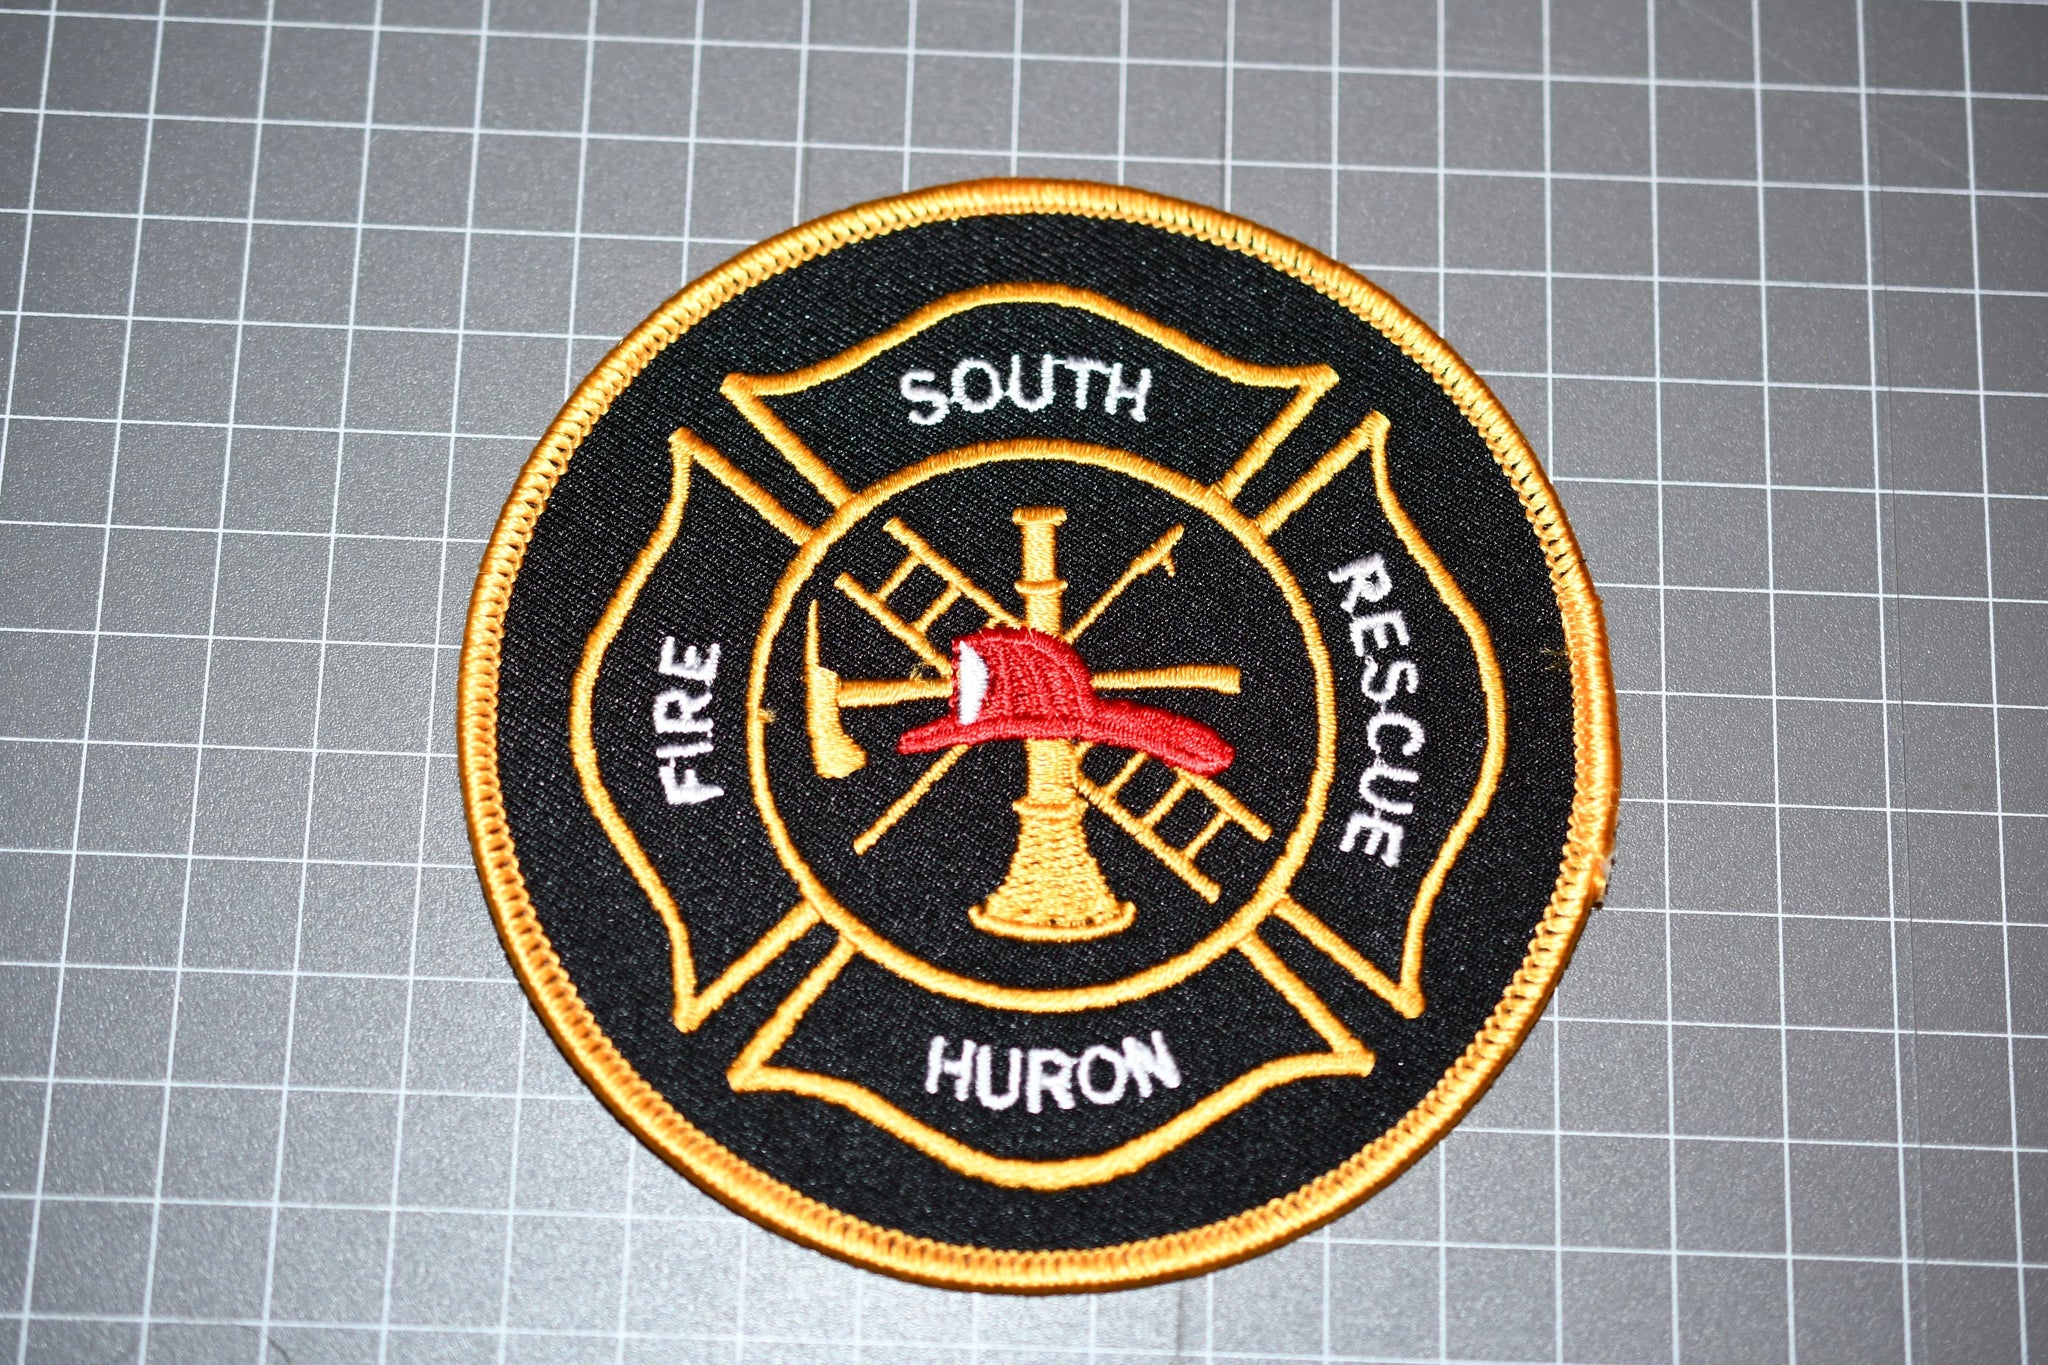 South Huron Canada Fire Department Patch (B1)